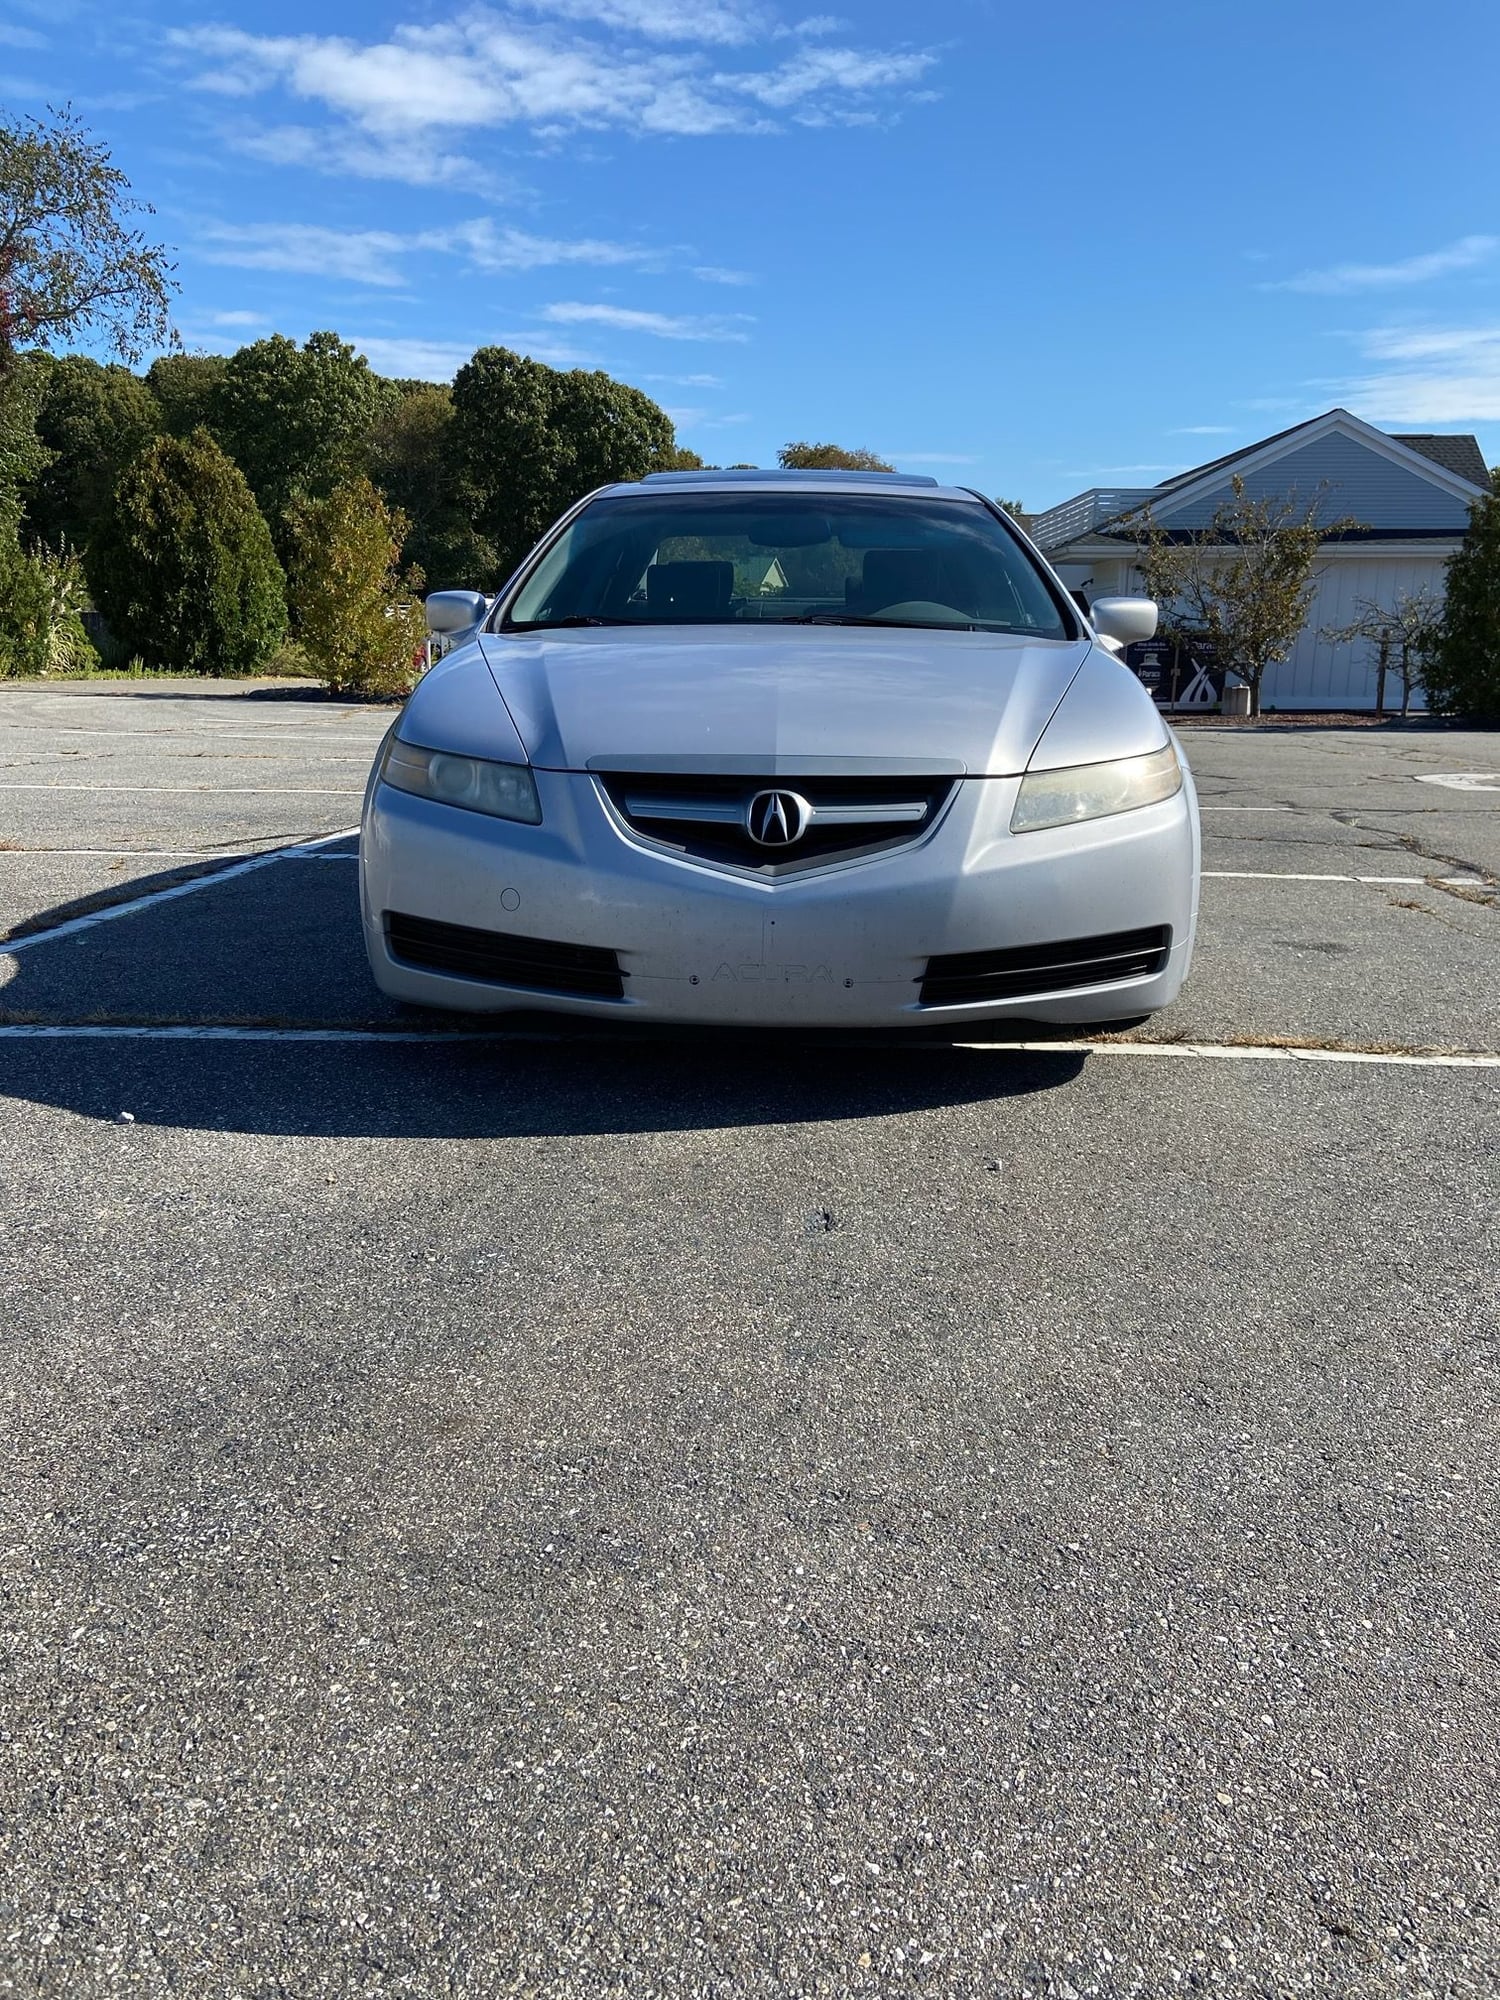 2004 Acura TL - FS: 2004 Acura TL $5500 OBO - Used - Guilford, CT 6437, United States